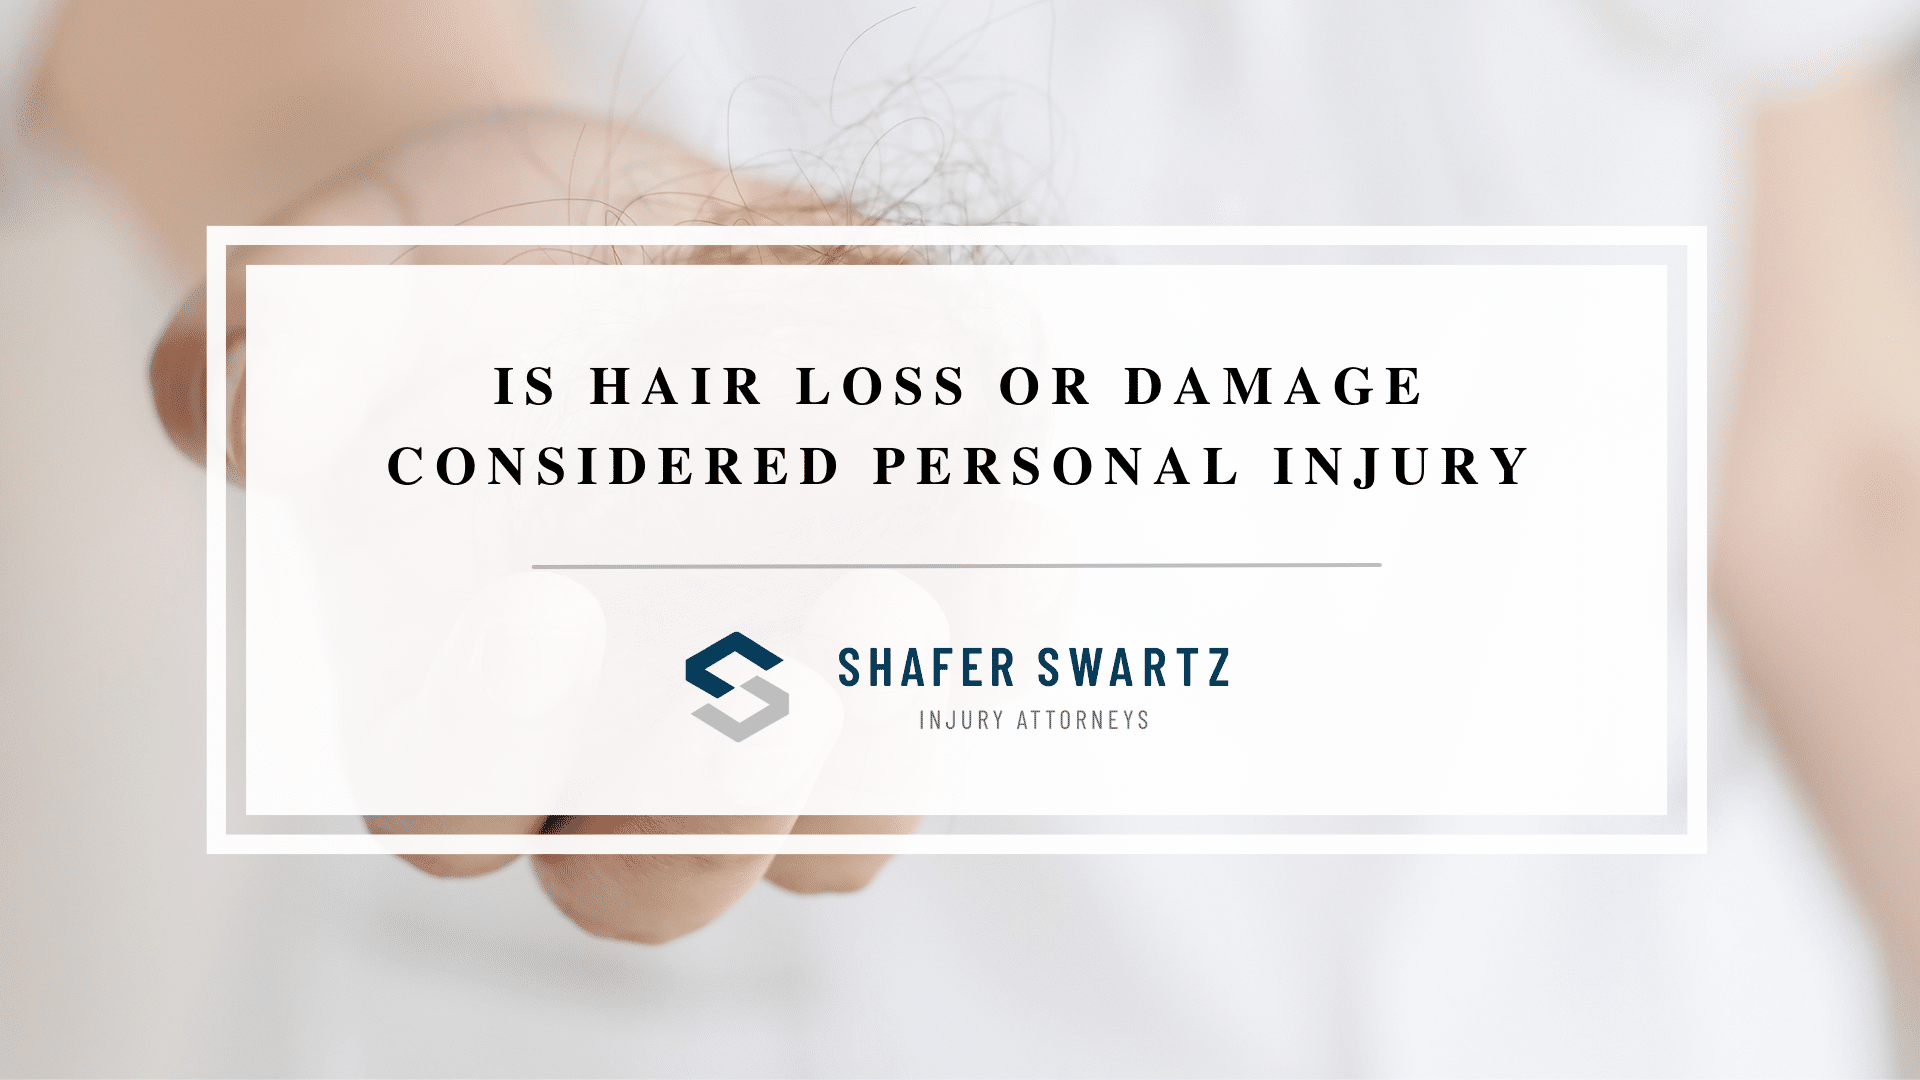 Featured image of hair loss or damage considered personal injury